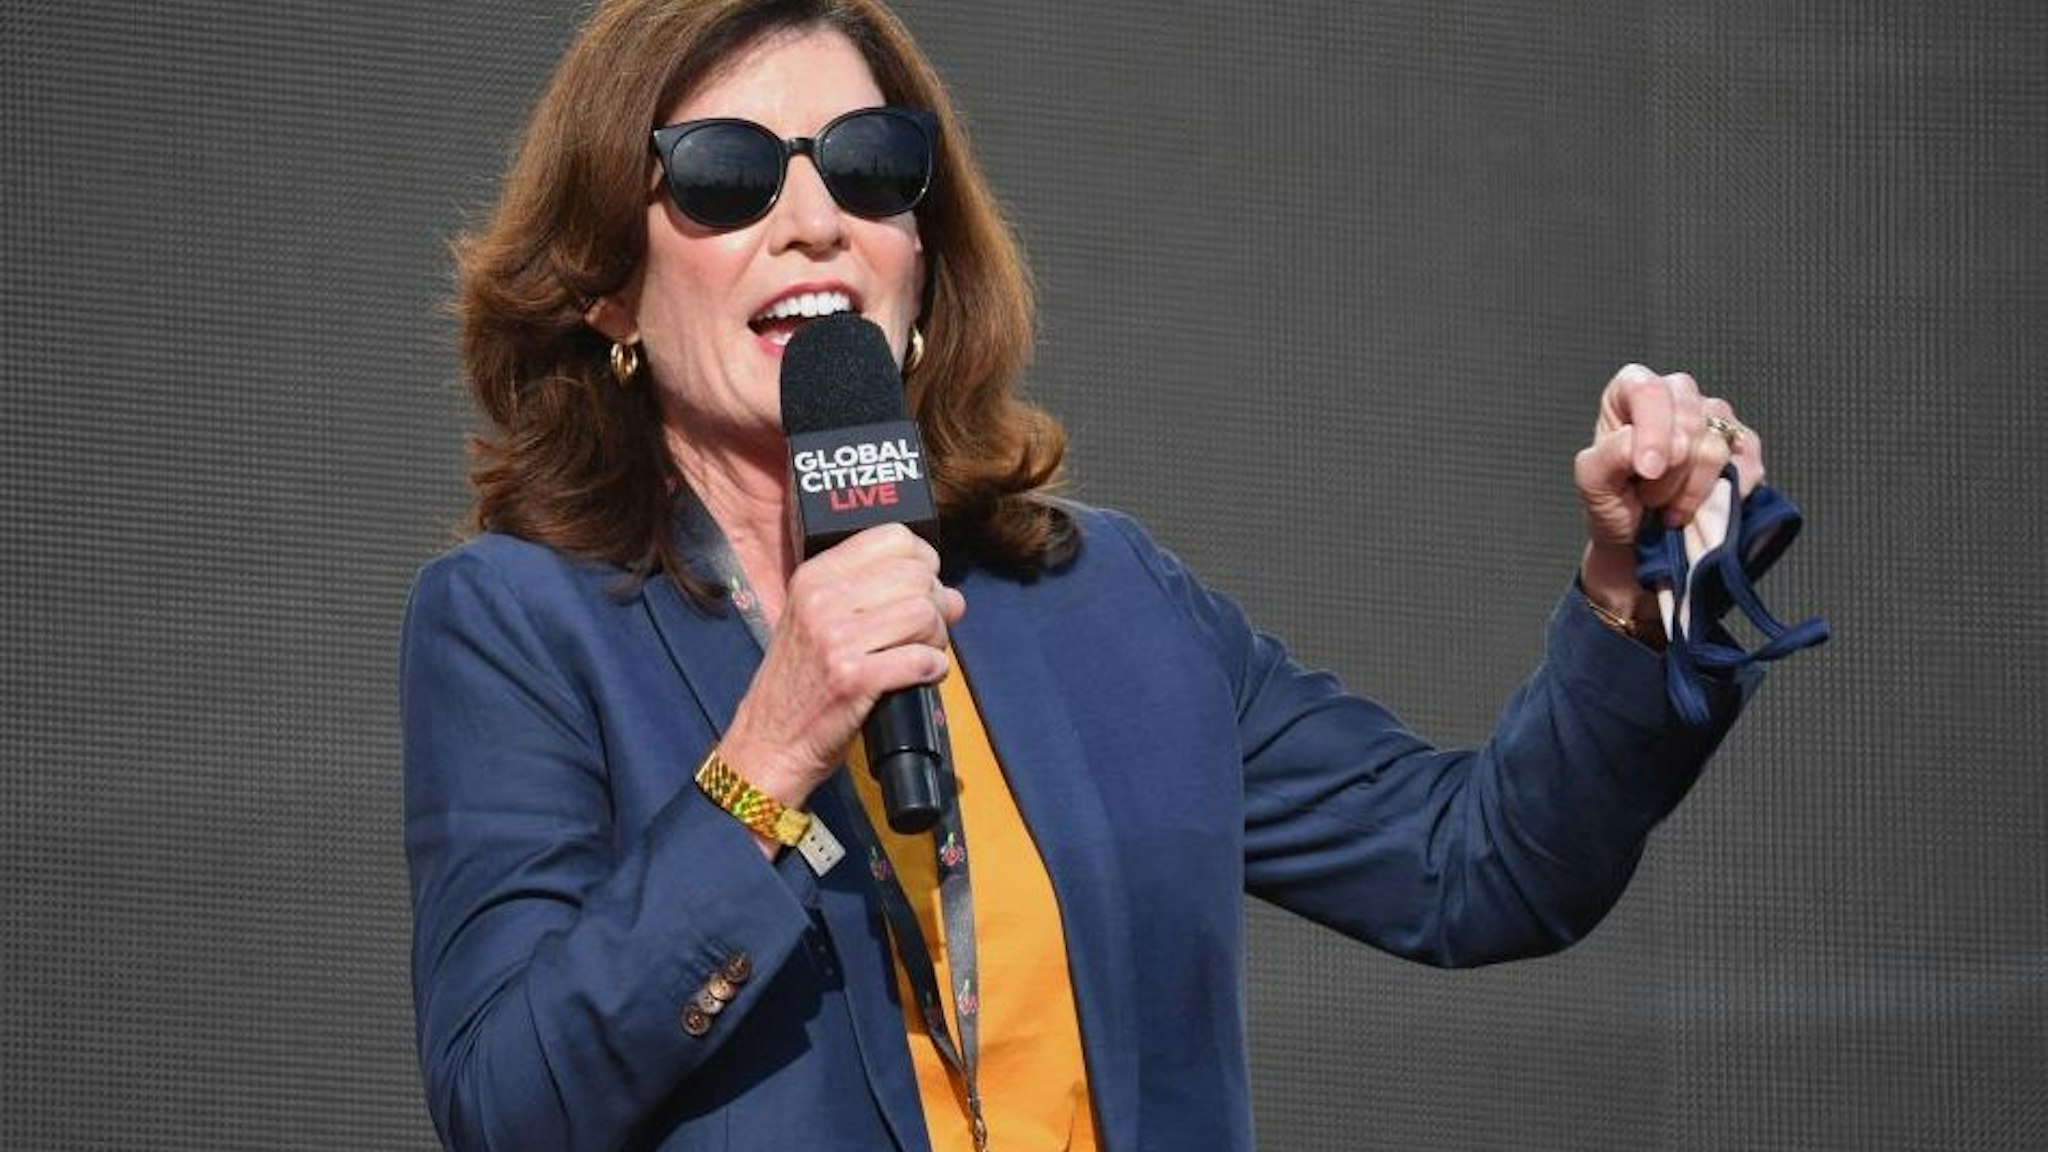 New York Governor Kathy Hochul speaks during the 2021 Global Citizen Live festival at the Great Lawn, Central Park on September 25, 2021 in New York City.